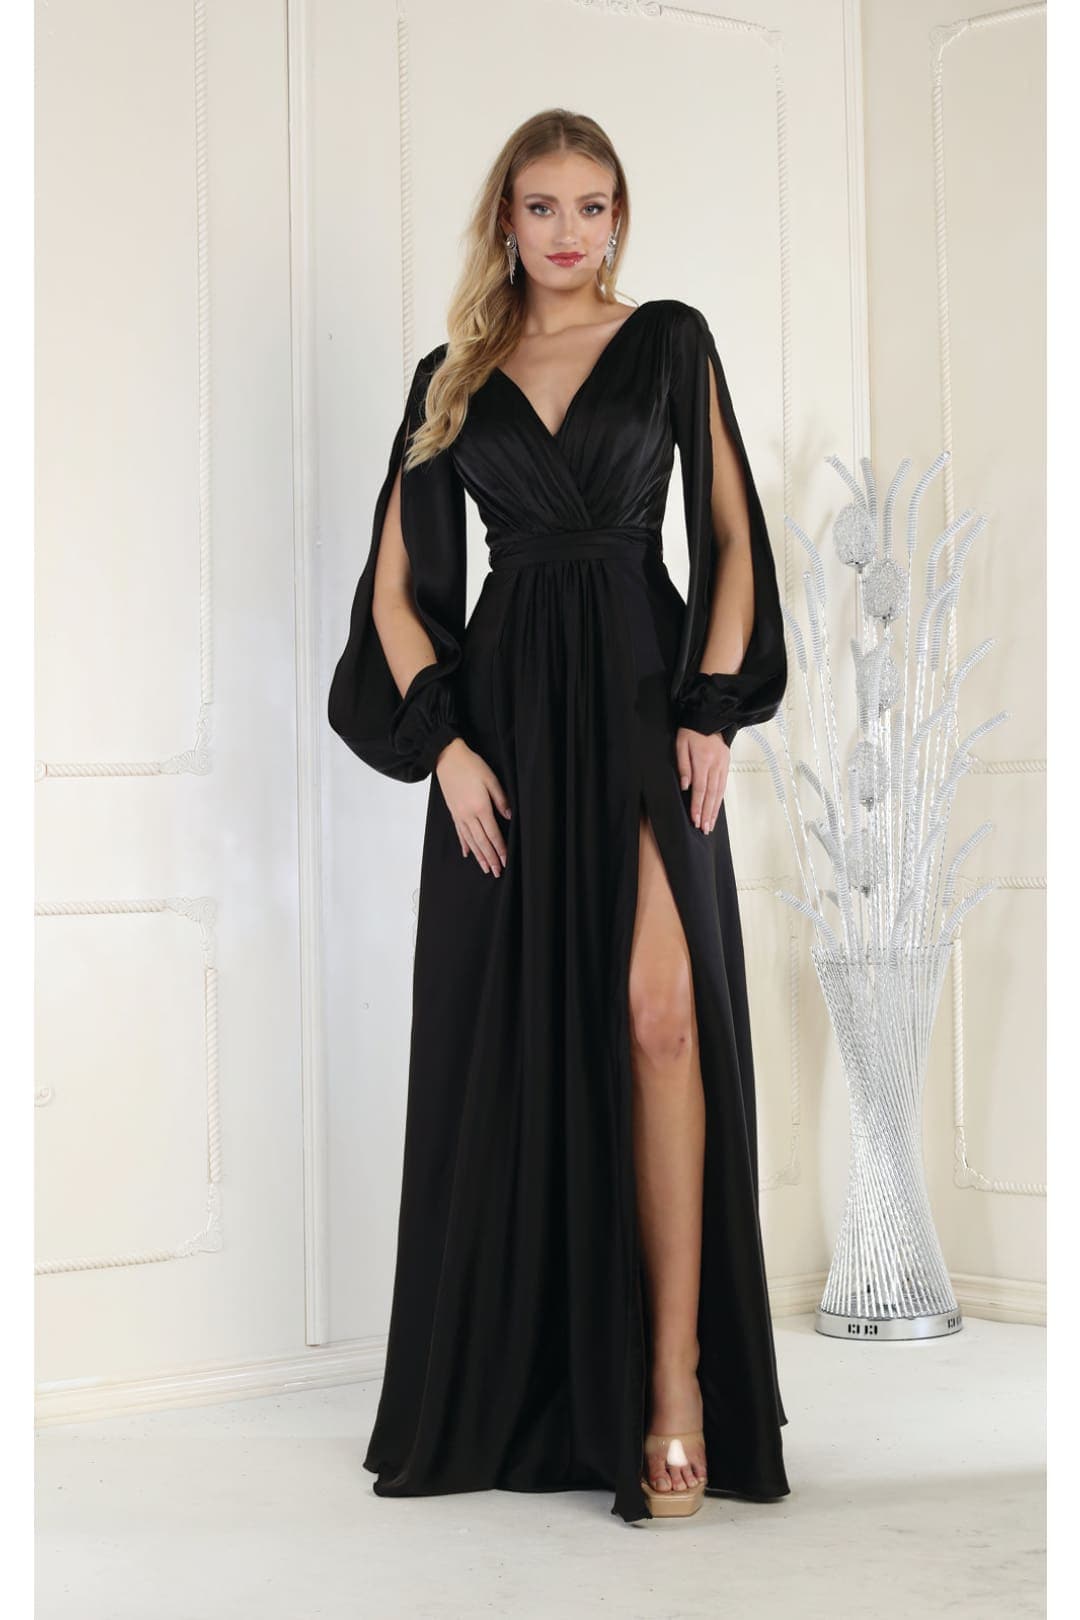 May Queen MQ1857 Split Long Sleeve High Slit Simple Evening Gown - BLACK / 4